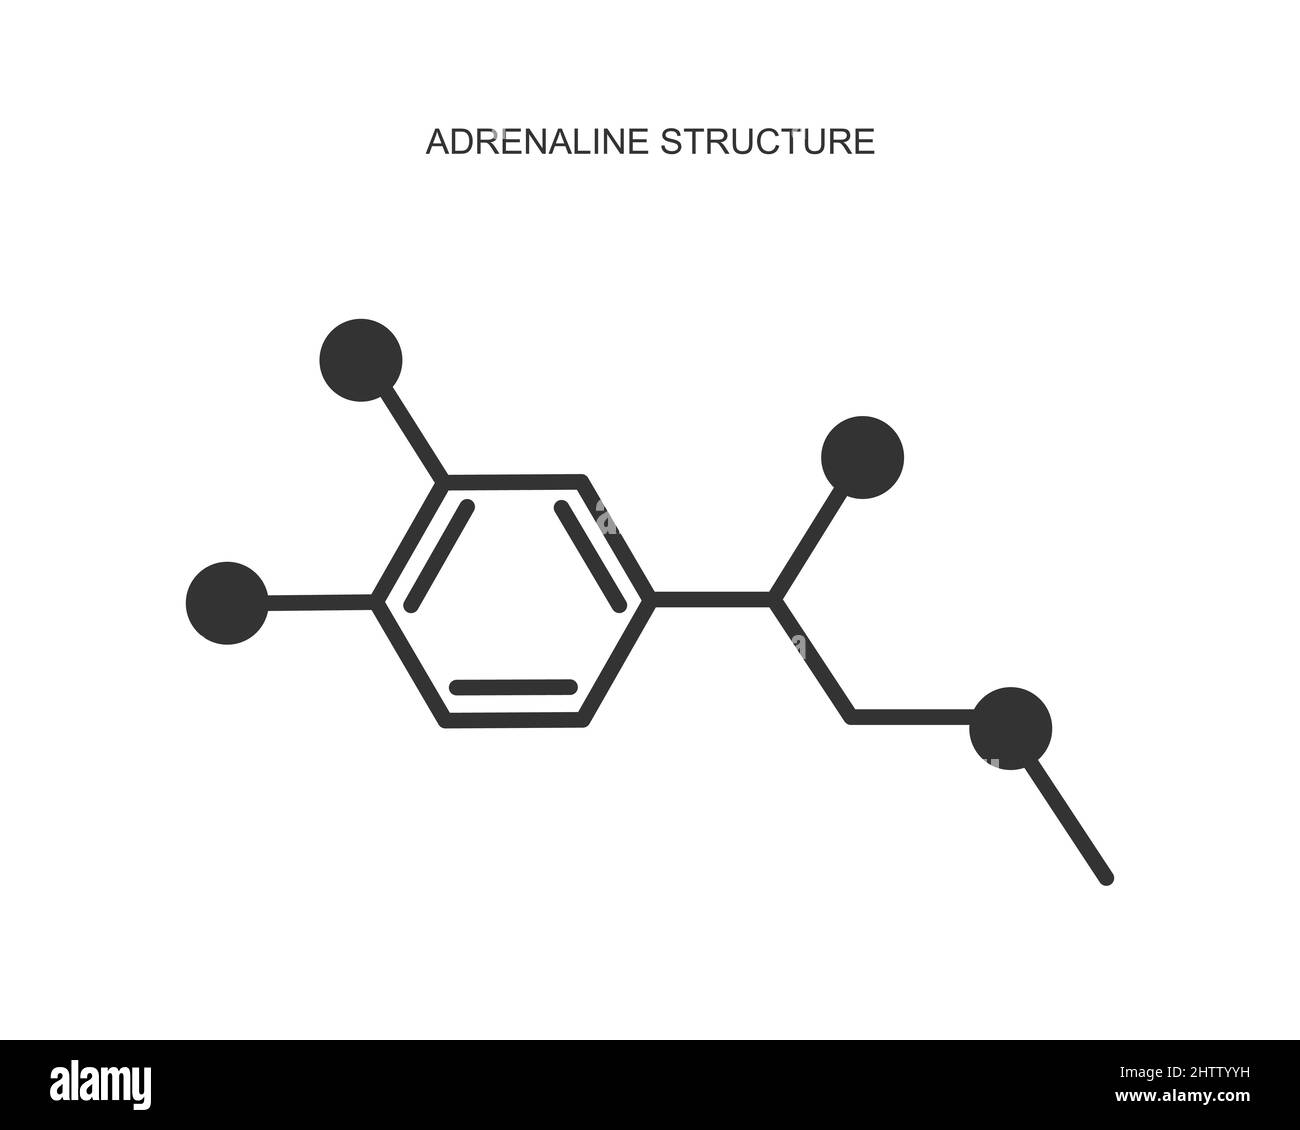 Adrenaline icon. Chemical molecular structure. Epinephrine hormone produced by the adrenal gland. Vector graphic illustration. Stock Vector